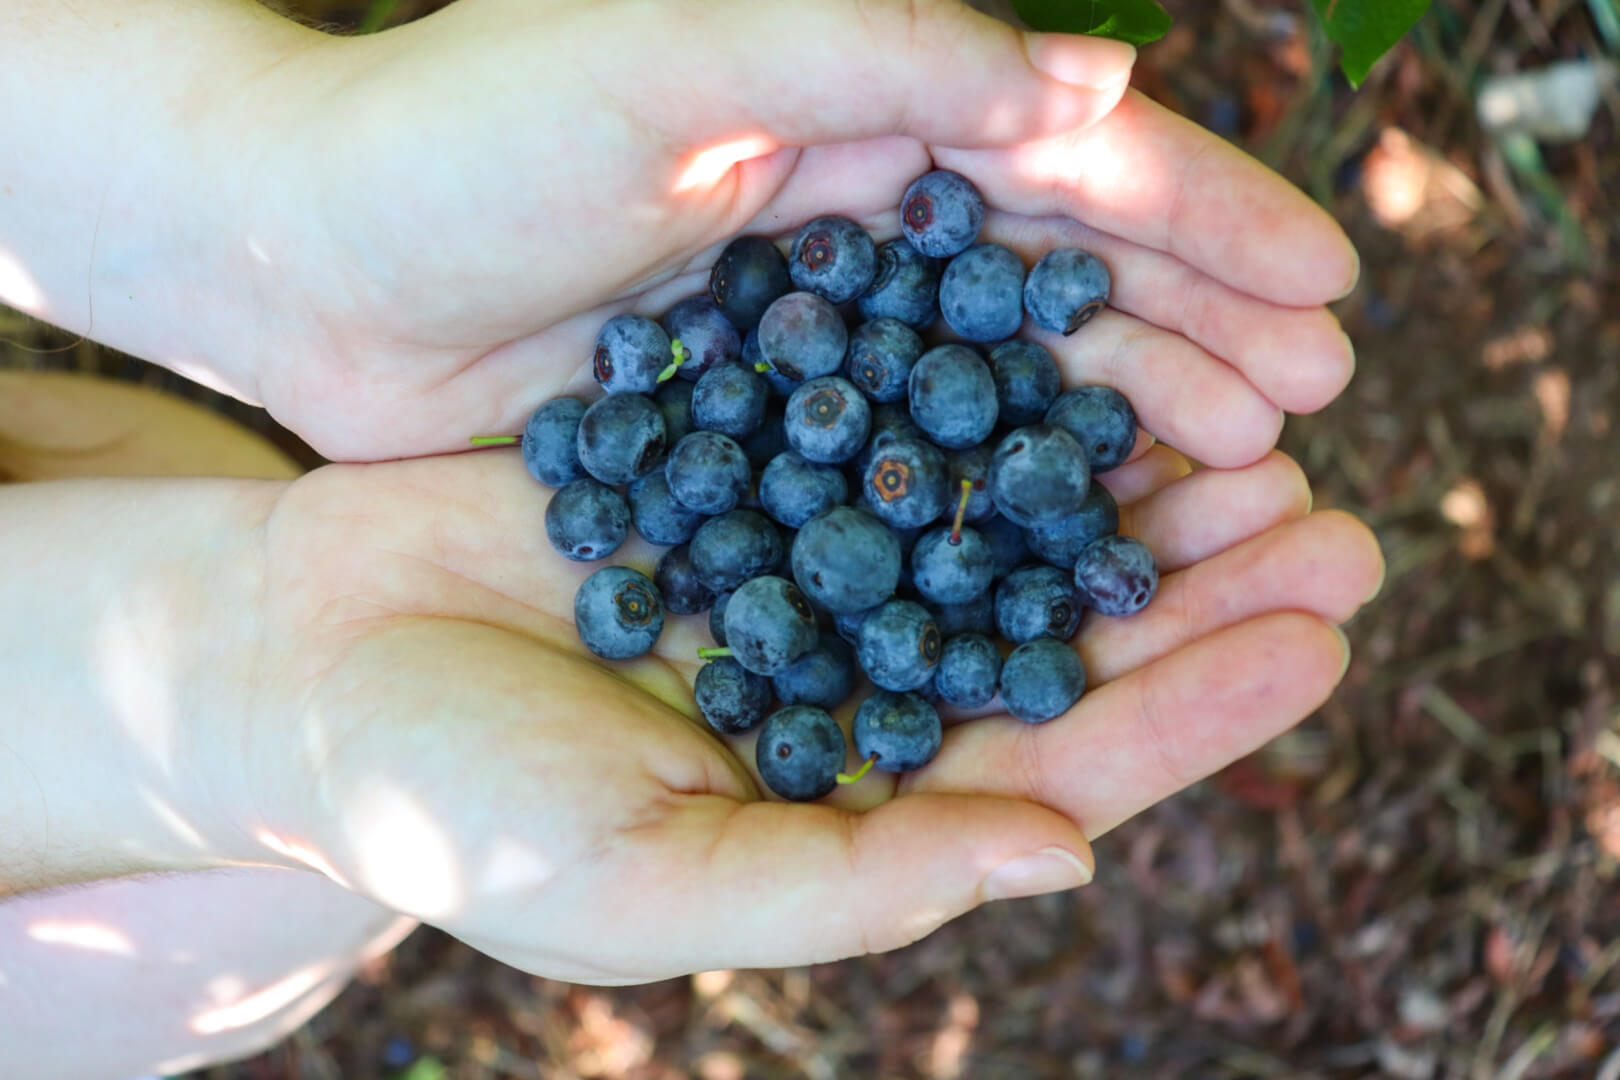 Where to Find Blueberry Picking near Chattanooga